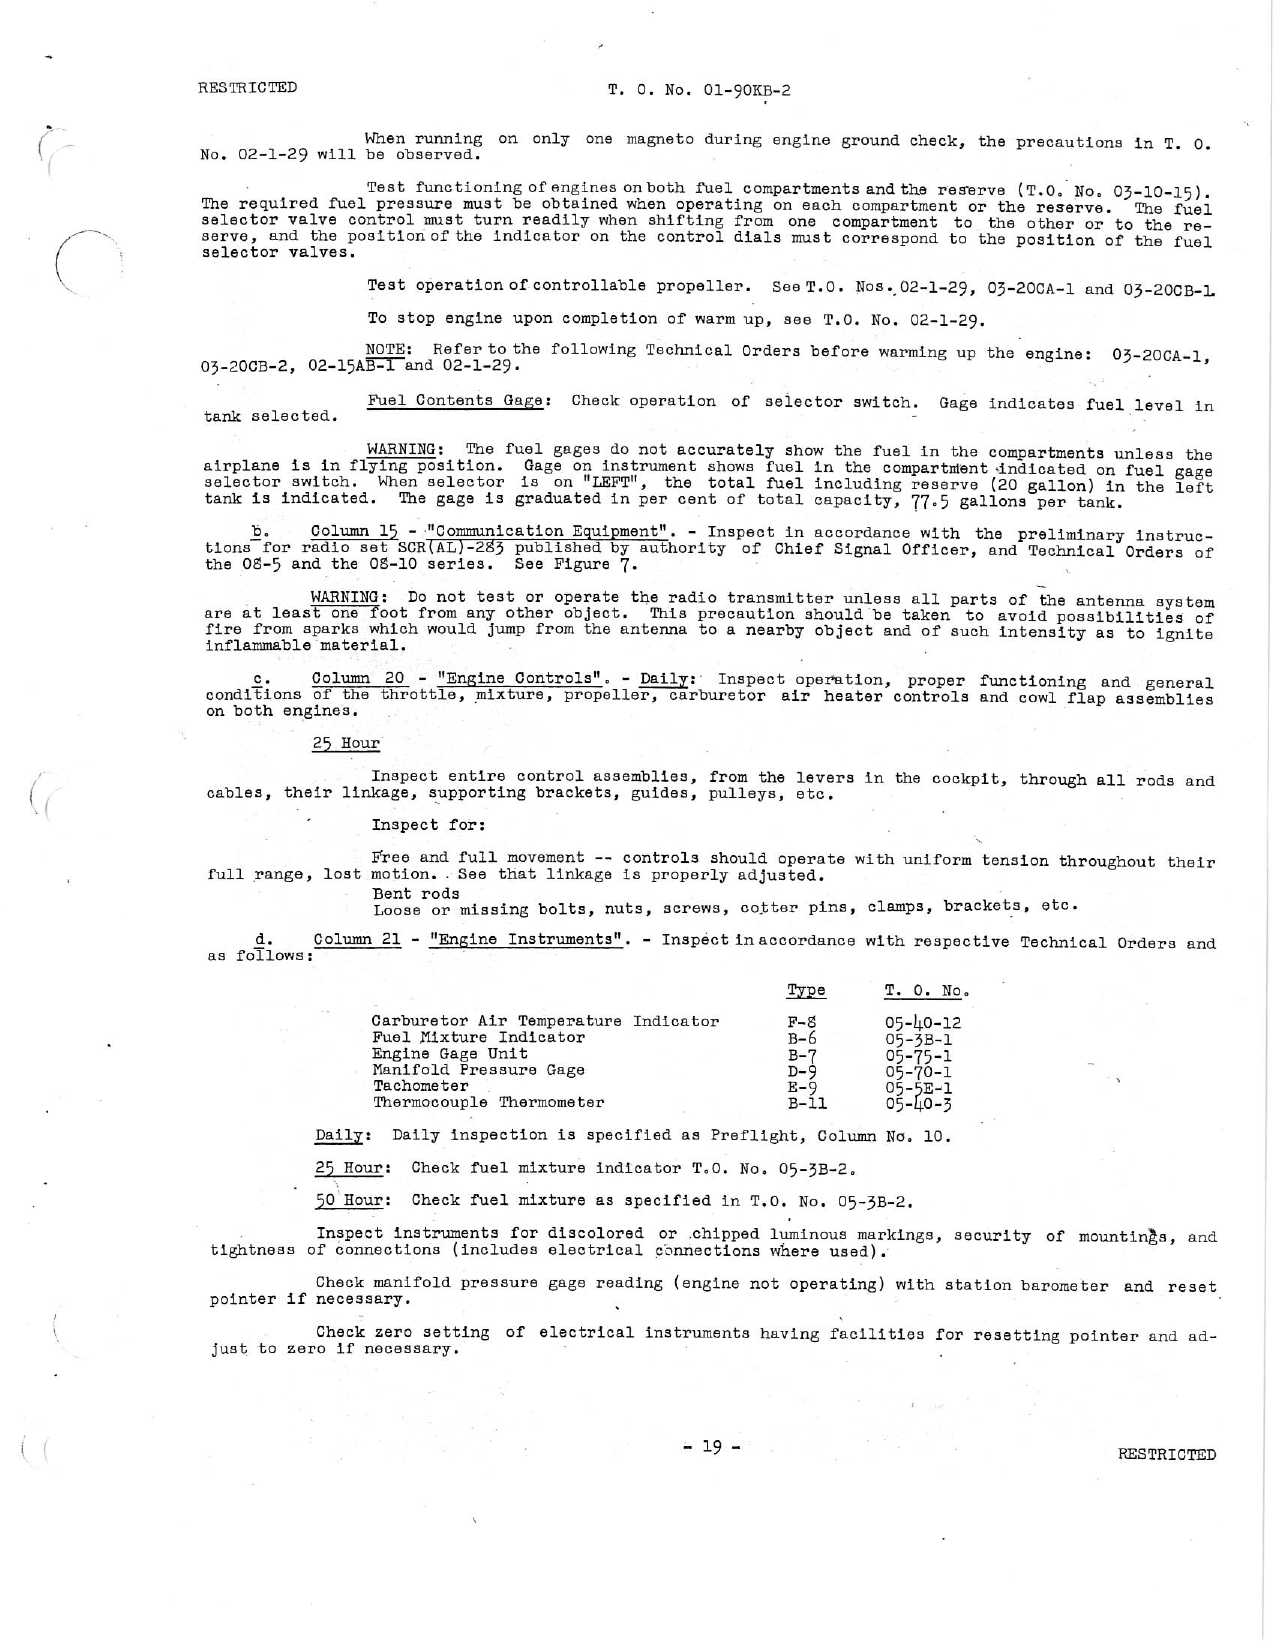 Sample page 129 from AirCorps Library document: Service Instructions - AT-10